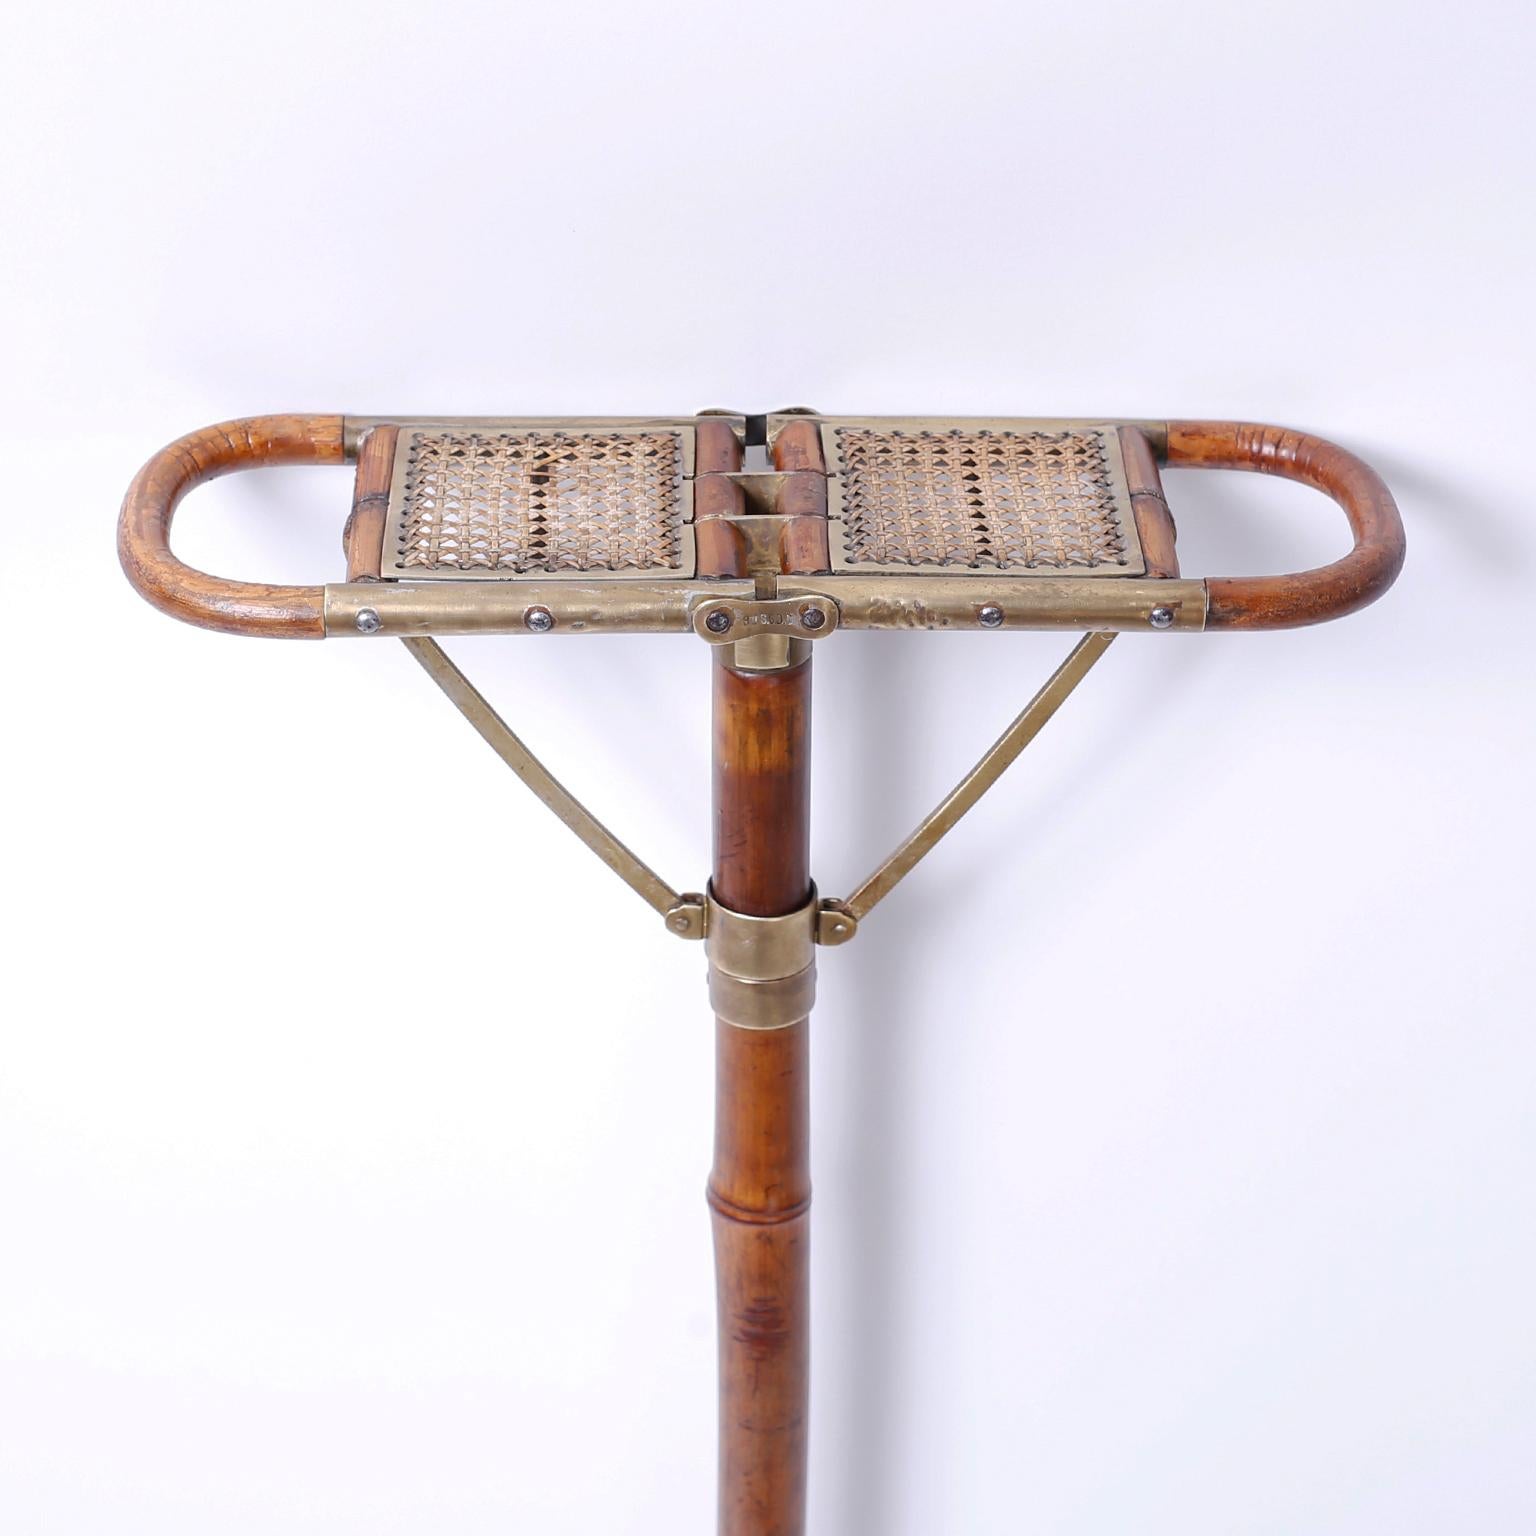 Rare antique English bamboo walking stick with a fold out caned seat, polished brass mechanism, and iron spike. Sometimes called a polo or hunting seat.